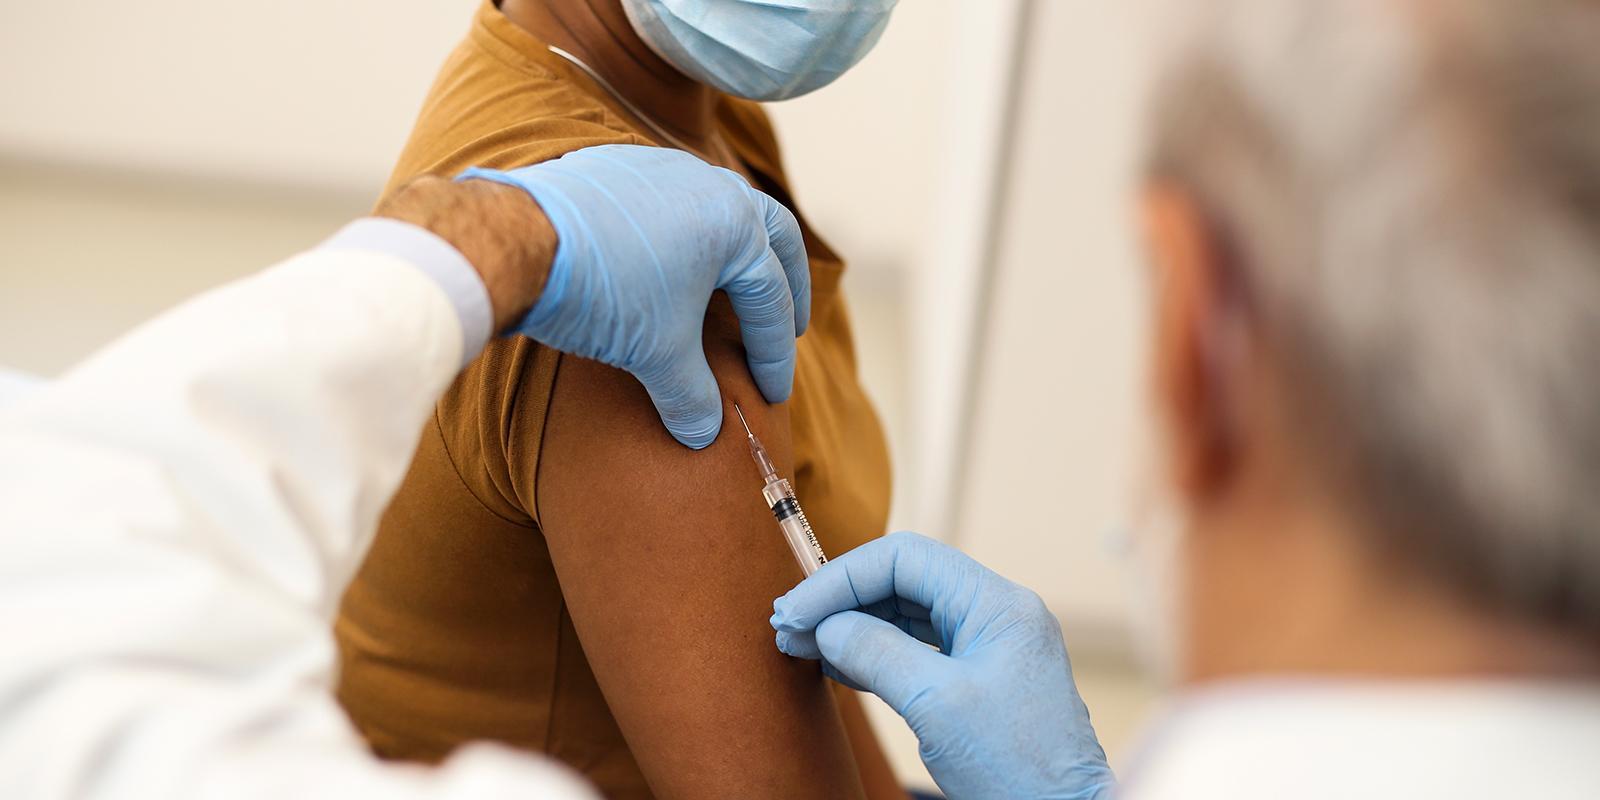 Doctor administering a vaccine to a patient